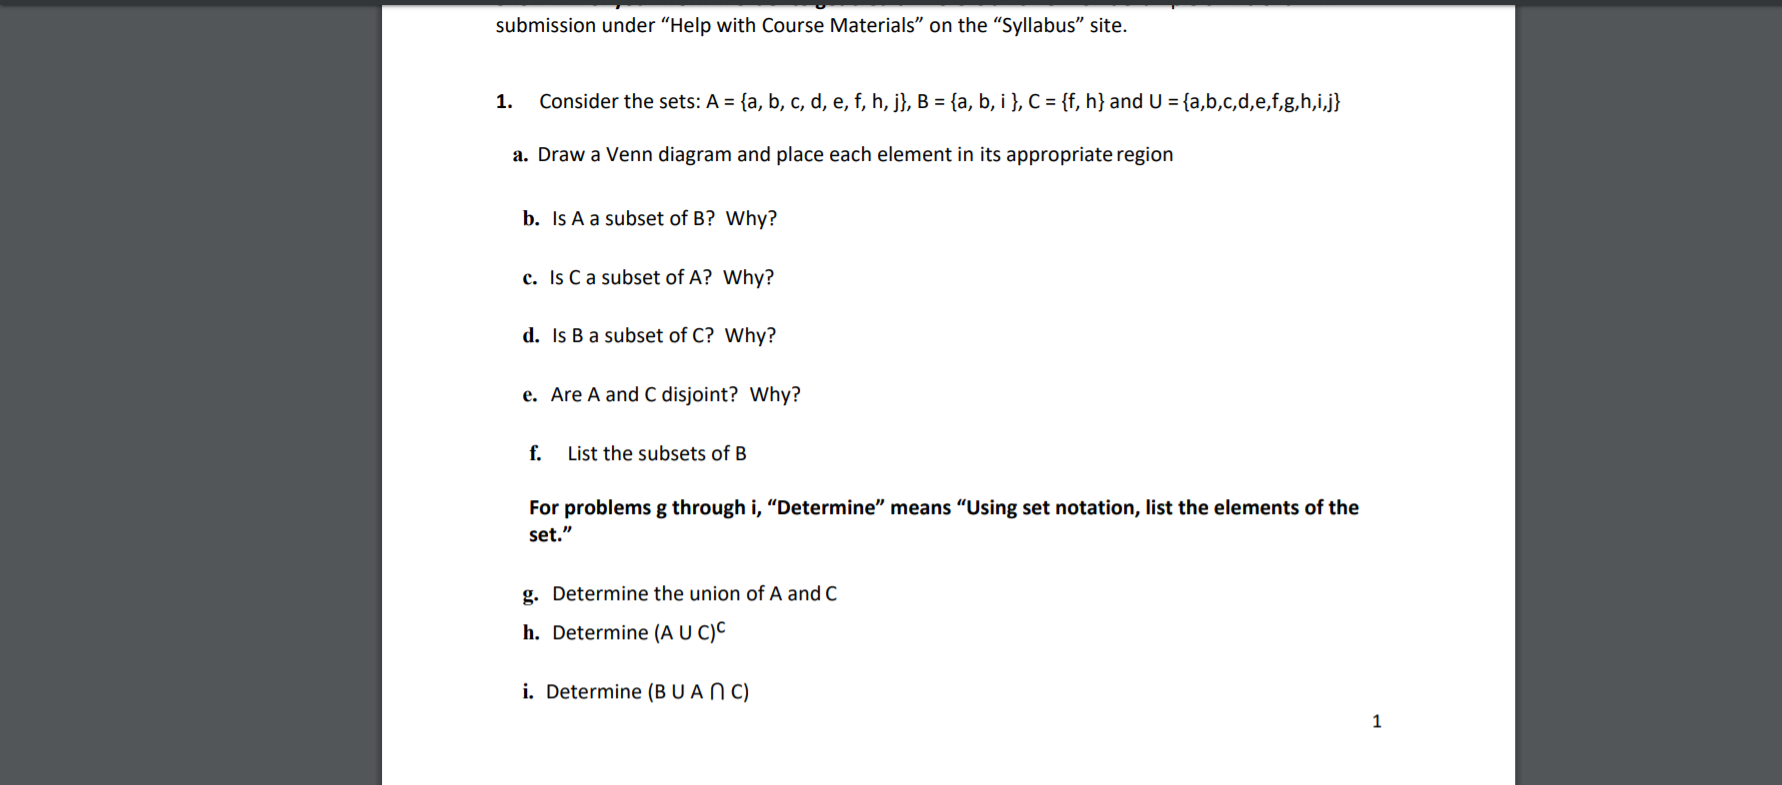 submission under "Help with Course Materials" on the "Syllabus" site.
Consider the sets: A = {a, b, c, d, e, f, h, j}, B = {a, b, i }, C = {f, h} and U = {a,b,c,d,e,f,g,h,i,j}
1.
a. Draw a Venn diagram and place each element in its appropriate region
b. Is A a subset of B? Why?
c. Is C a subset of A? Why?
d. Is B a subset of C? Why?
e. Are A and C disjoint? Why?
f.
List the subsets of B
For problems g through i, "Determine" means "Using set notation, list the elements of the
set."
g. Determine the union of A and C
h. Determine (A U C)C
i. Determine (BU A N C)
